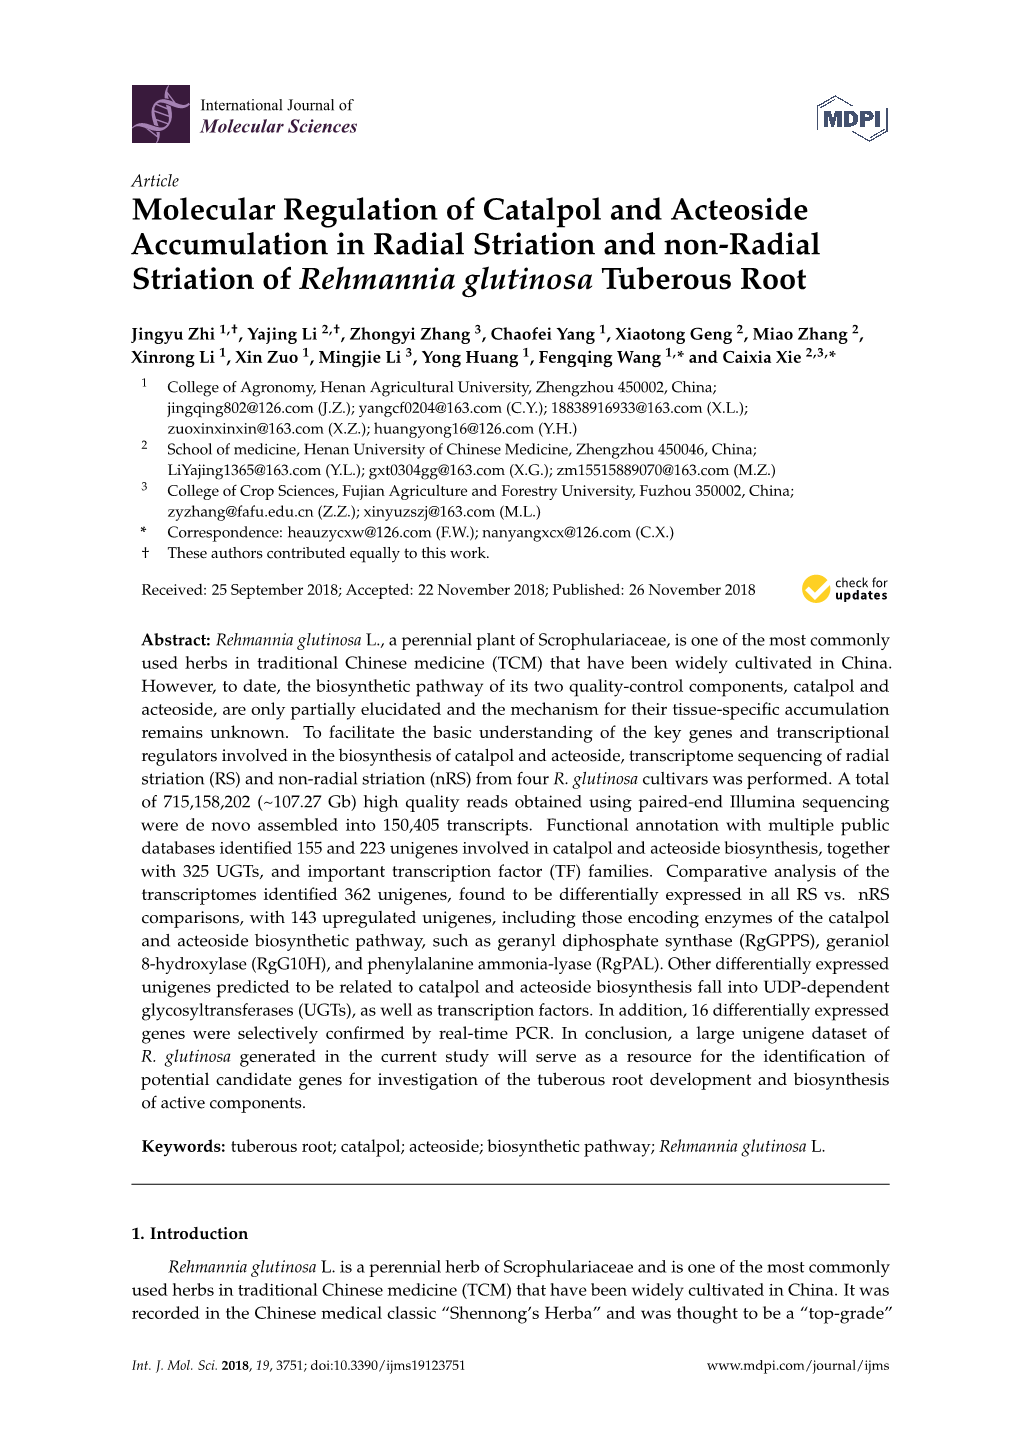 Molecular Regulation of Catalpol and Acteoside Accumulation in Radial Striation and Non-Radial Striation of Rehmannia Glutinosa Tuberous Root